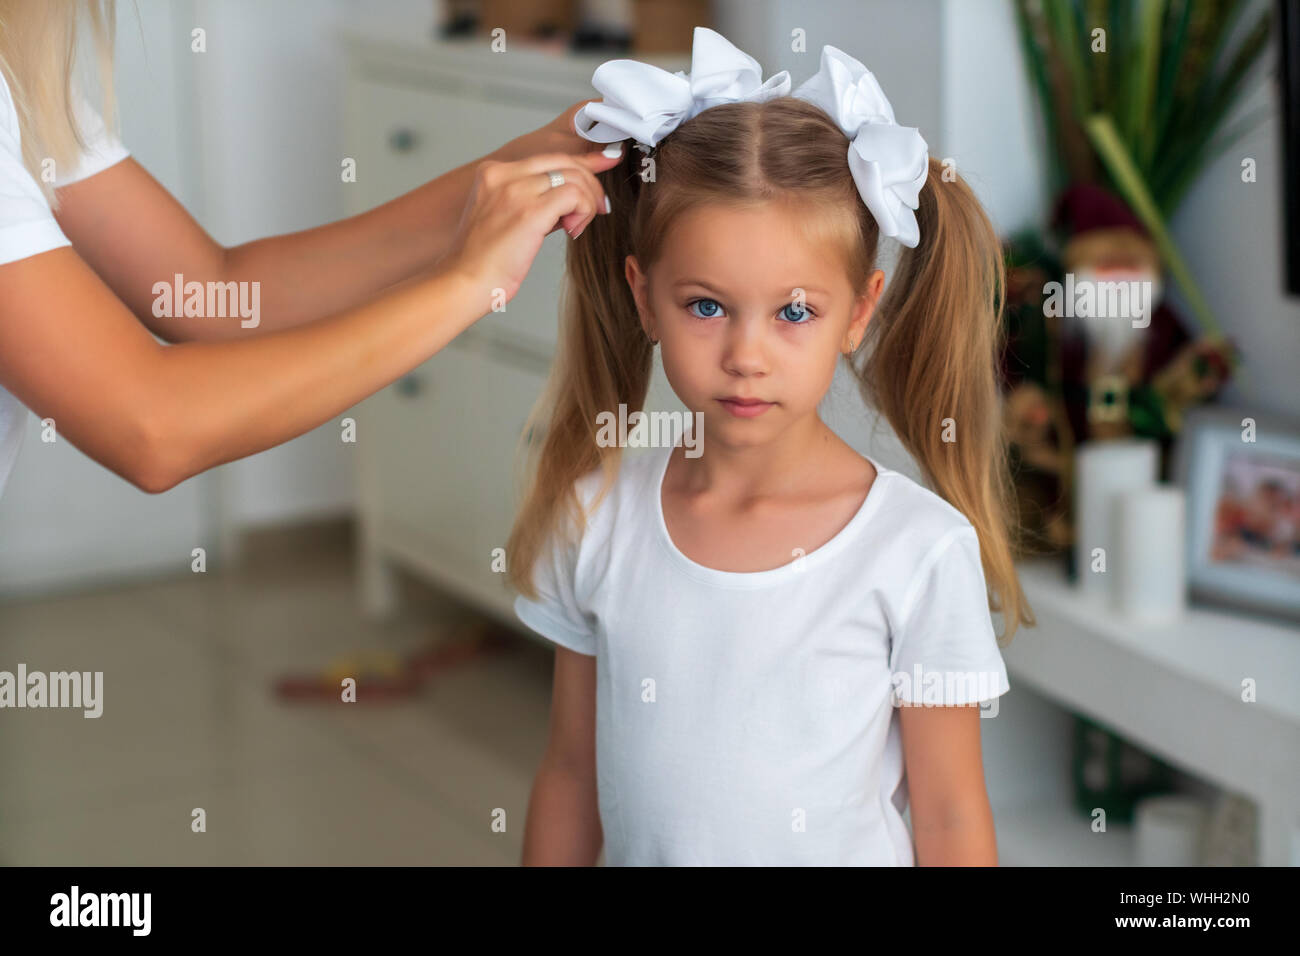 Mother combing her daughter's hair. Hair in hand Stock Photo